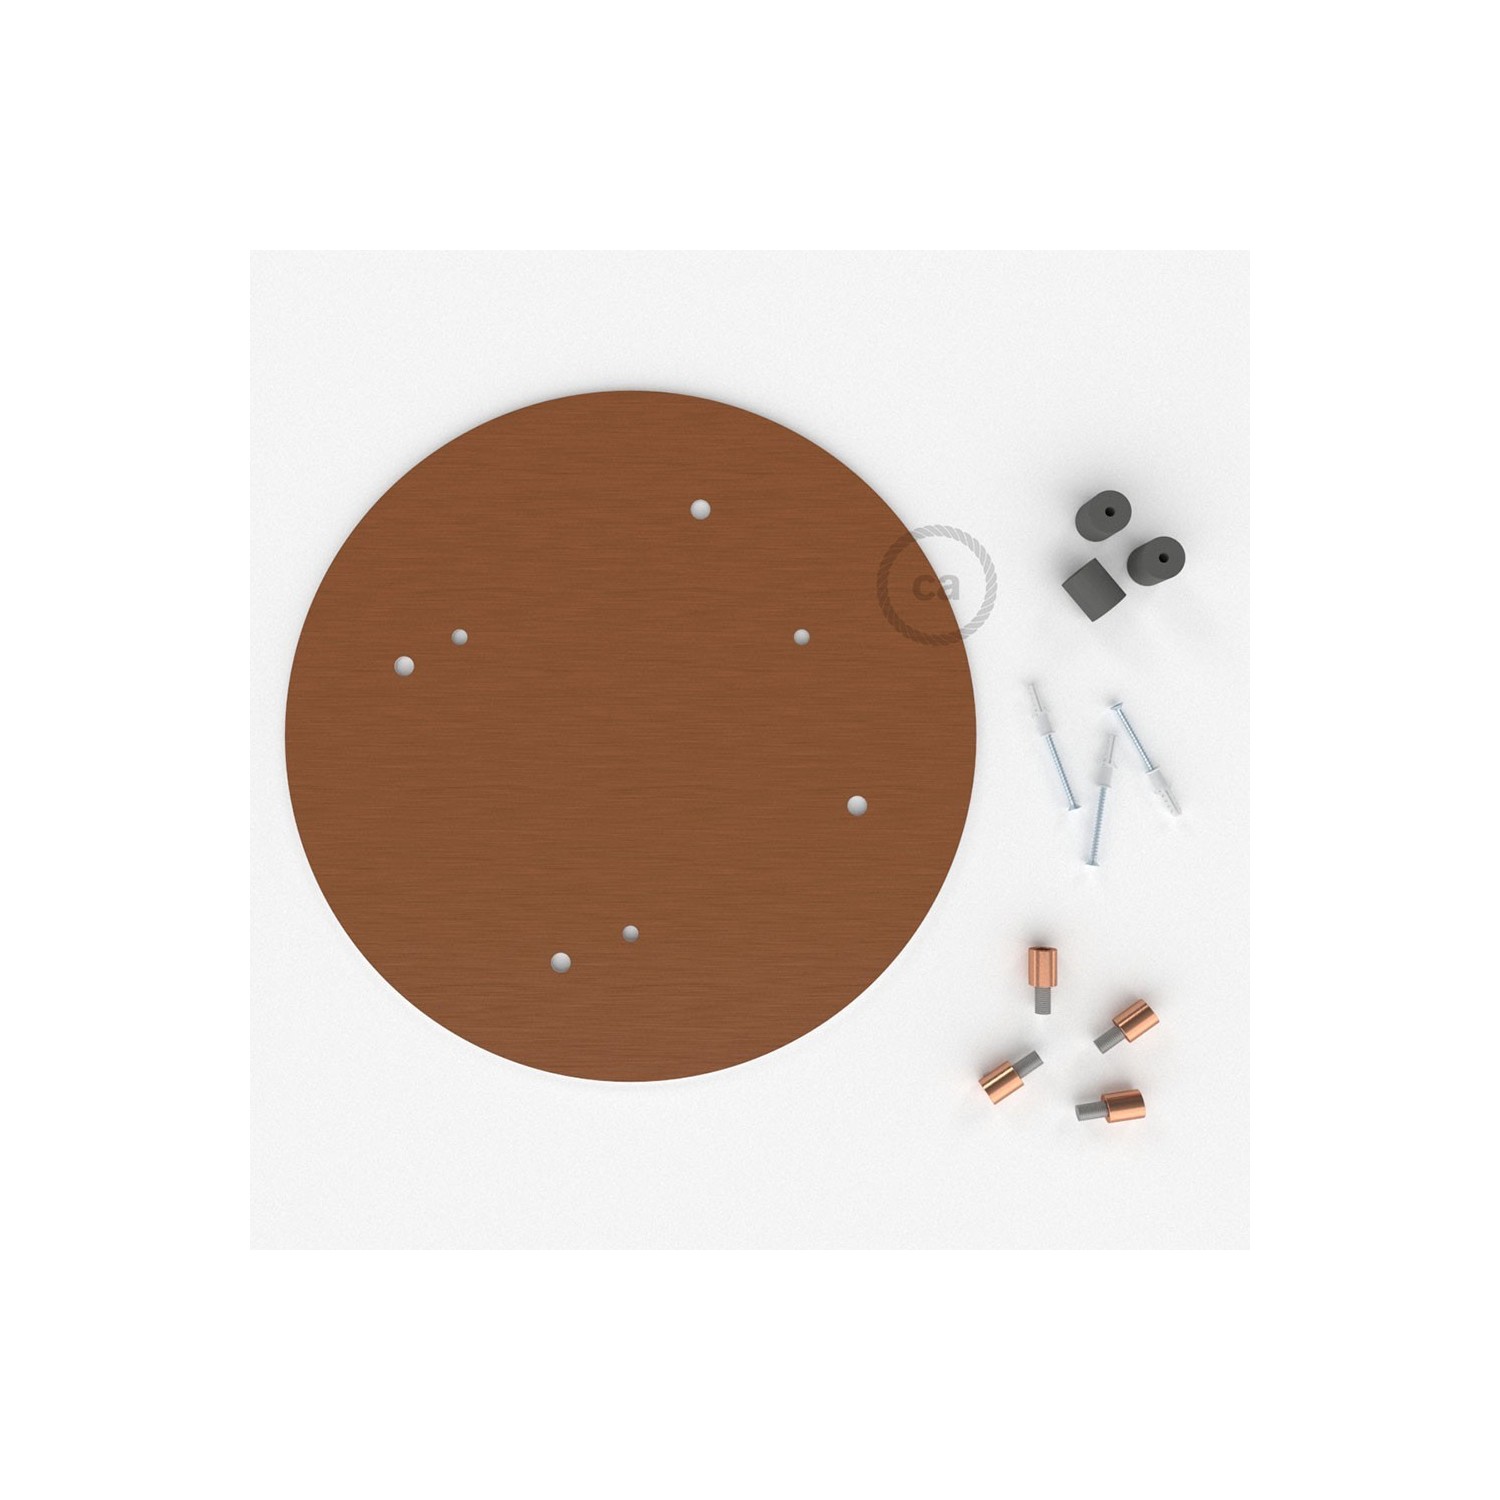 Round 35 cm Satin Copper XXL Ceiling Rose with 4 holes + Accessories